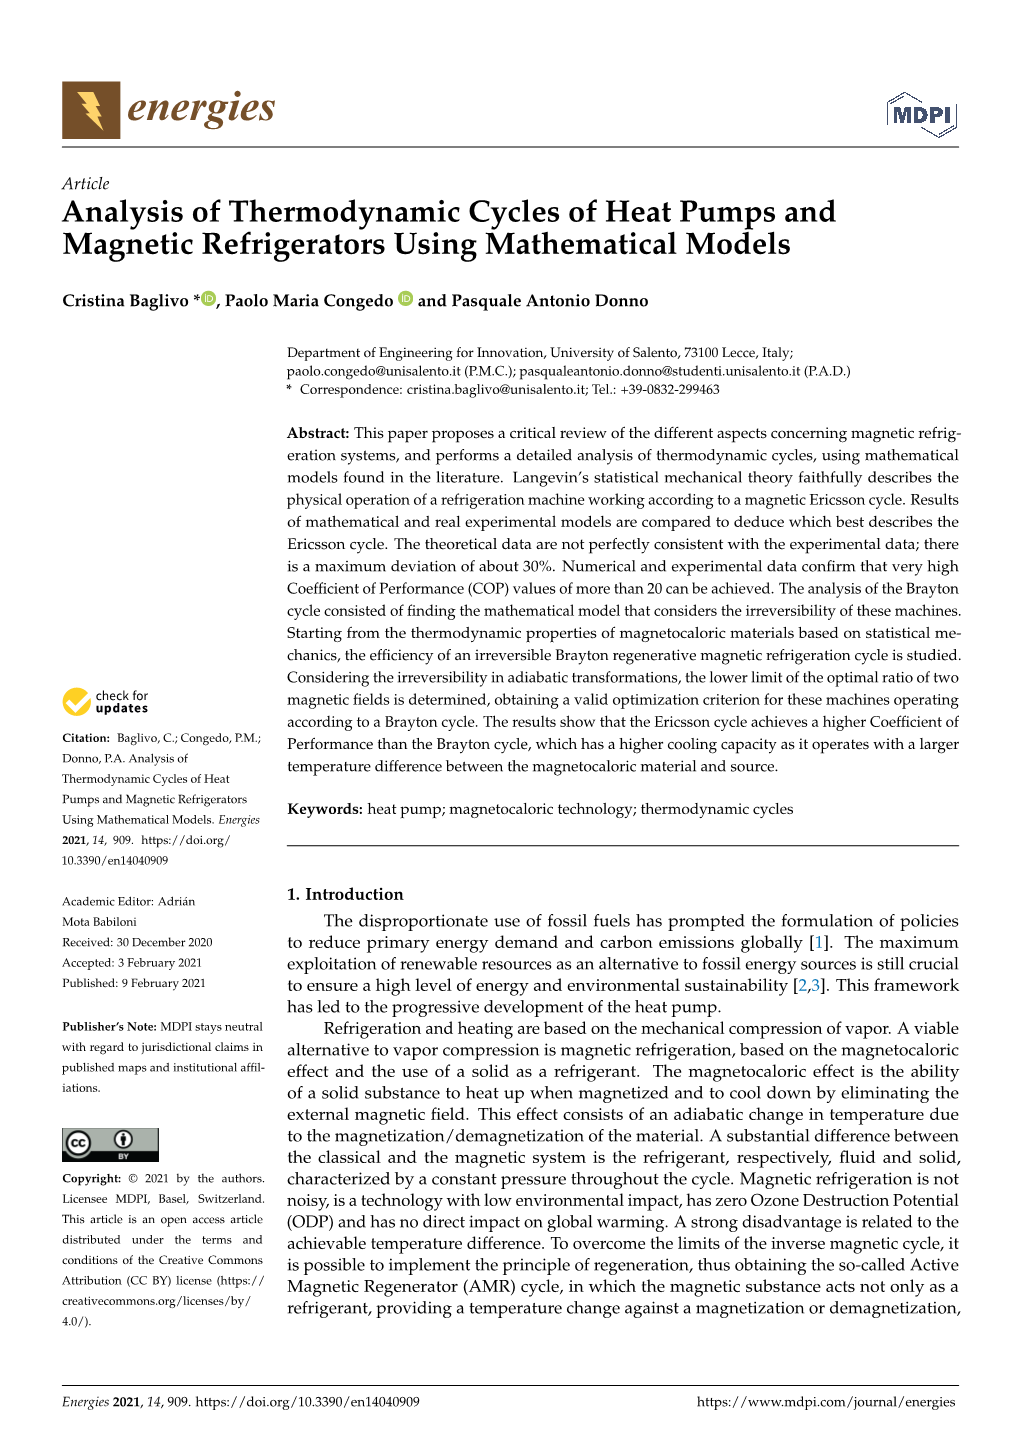 Analysis of Thermodynamic Cycles of Heat Pumps and Magnetic Refrigerators Using Mathematical Models